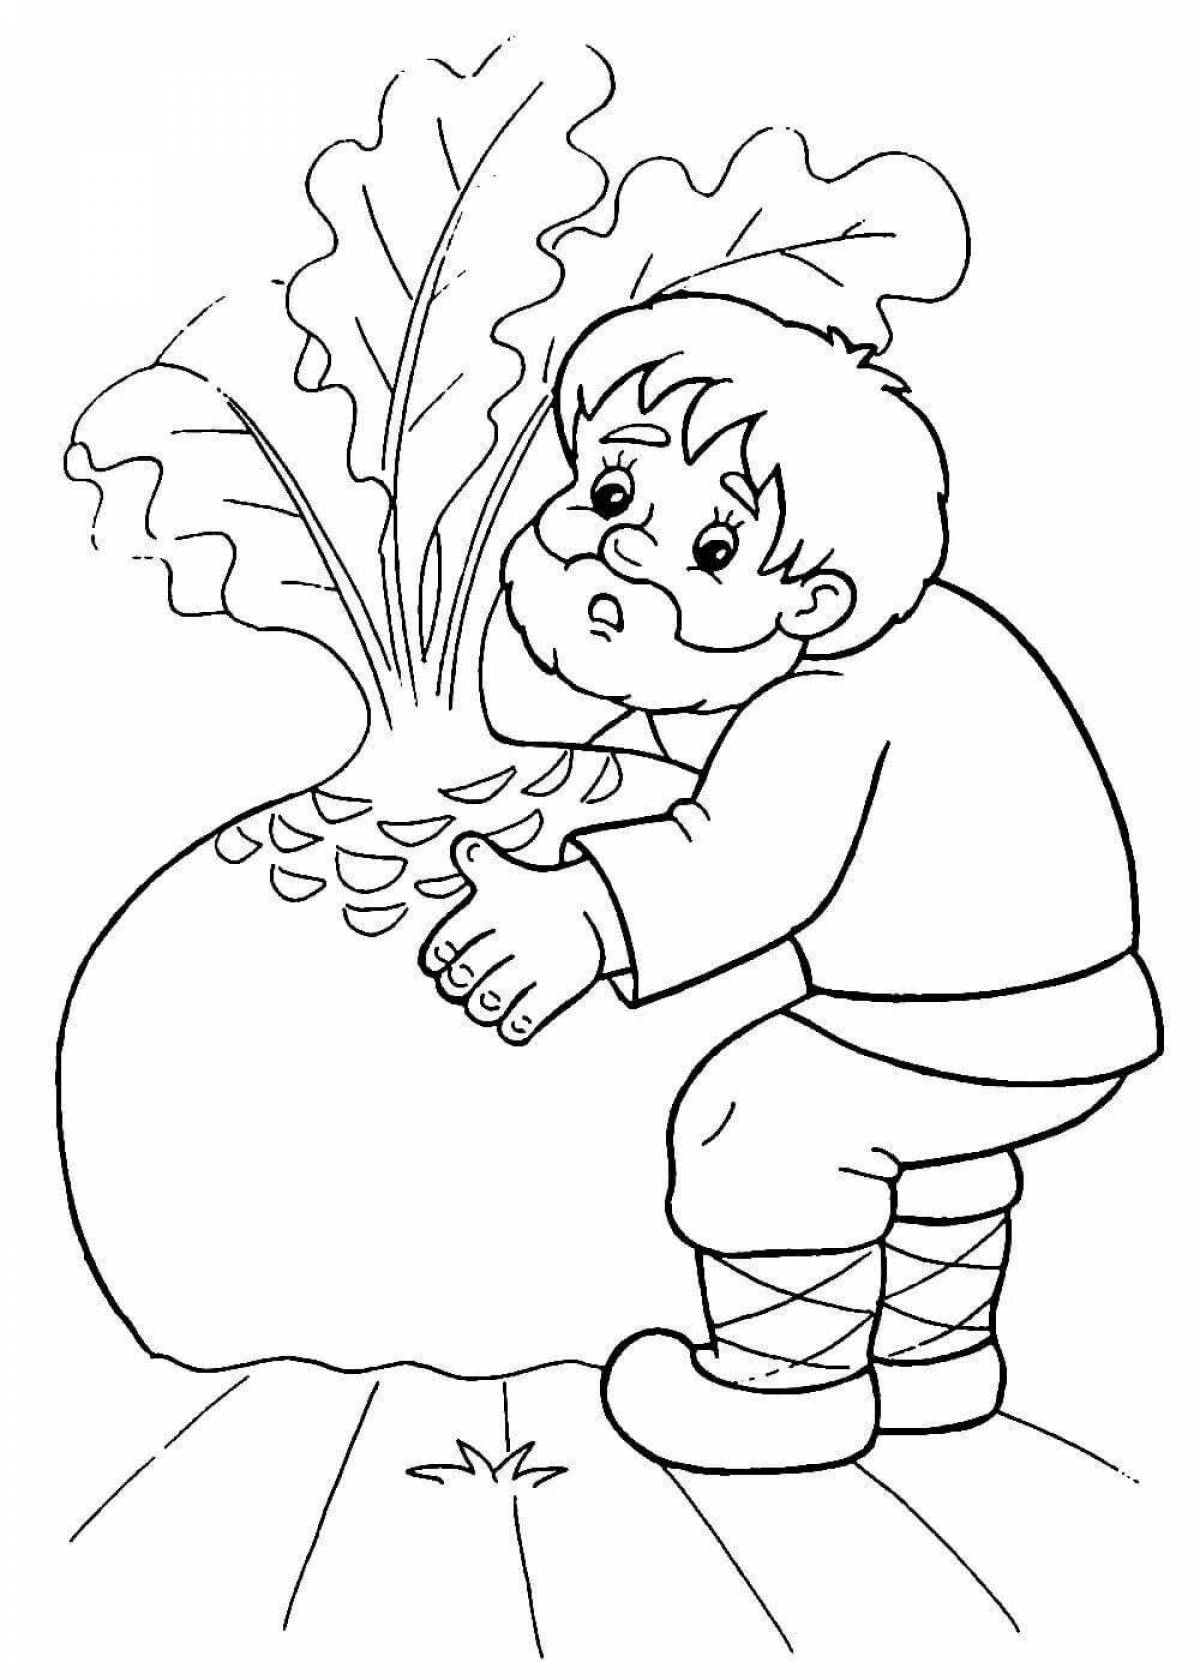 Fancy turnip coloring for babies